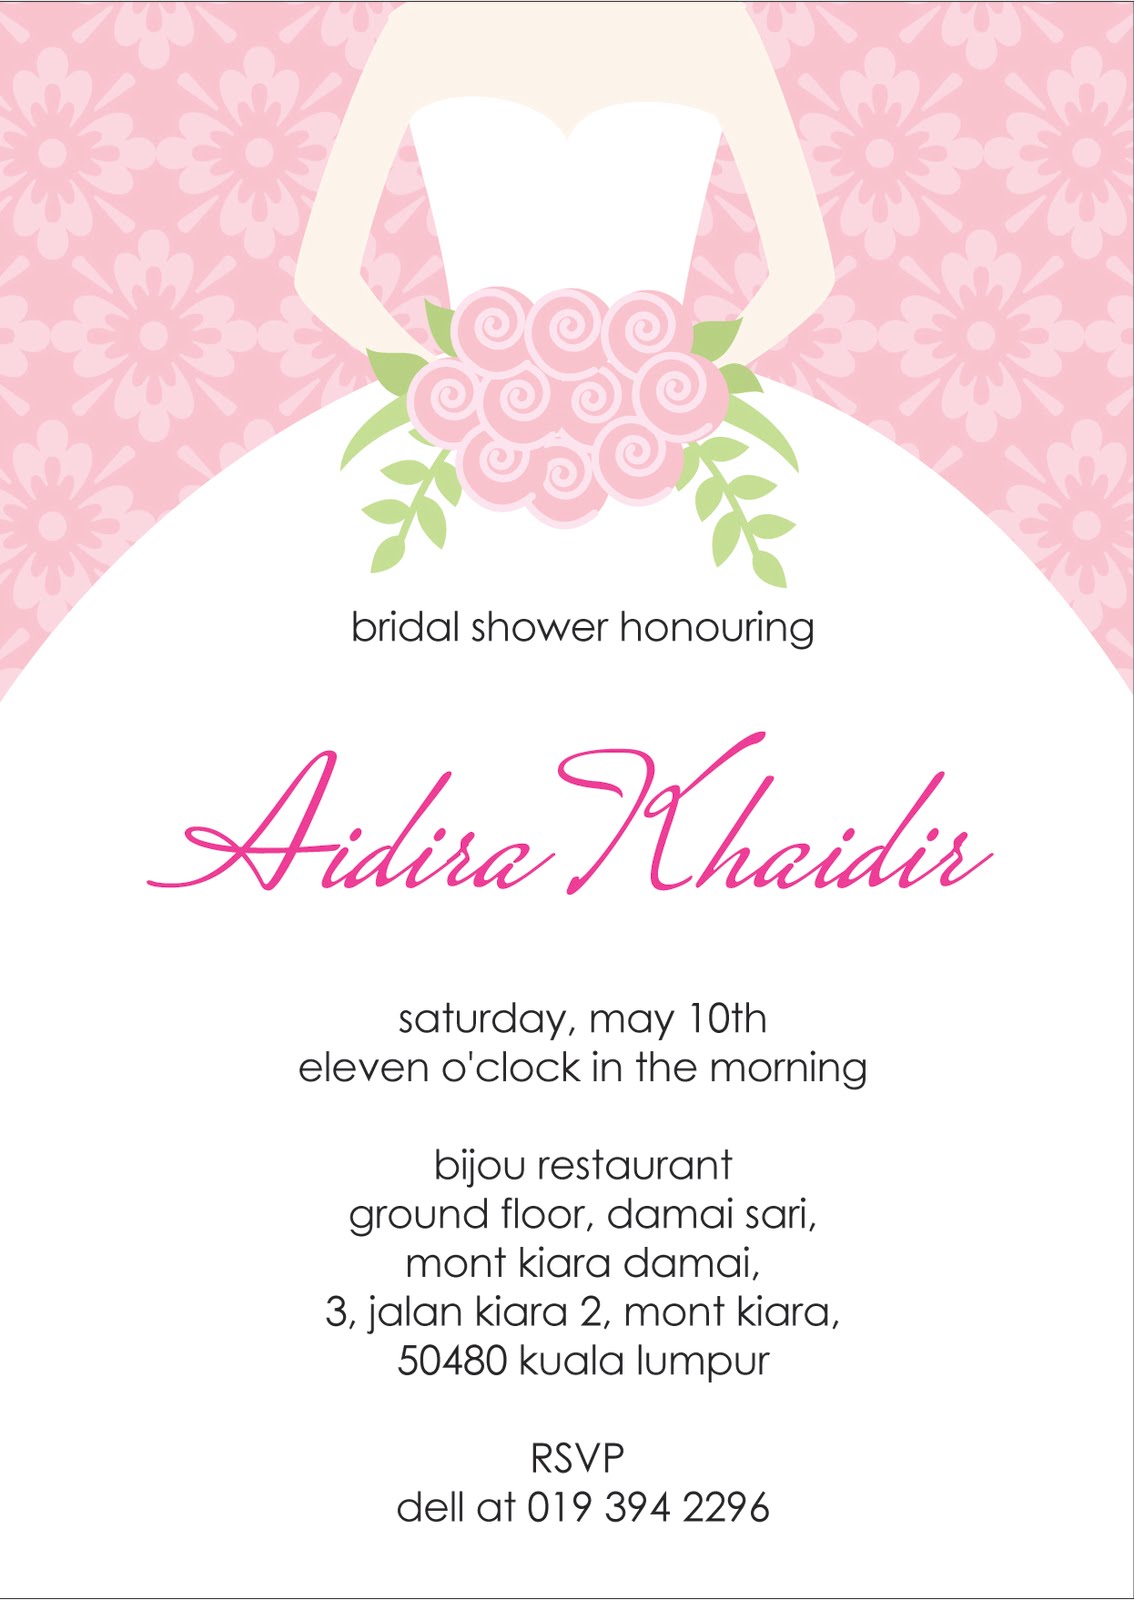 your-one-stop-wedding-centre-gifts-deco-favors-and-such-bridal-shower-invitation-card